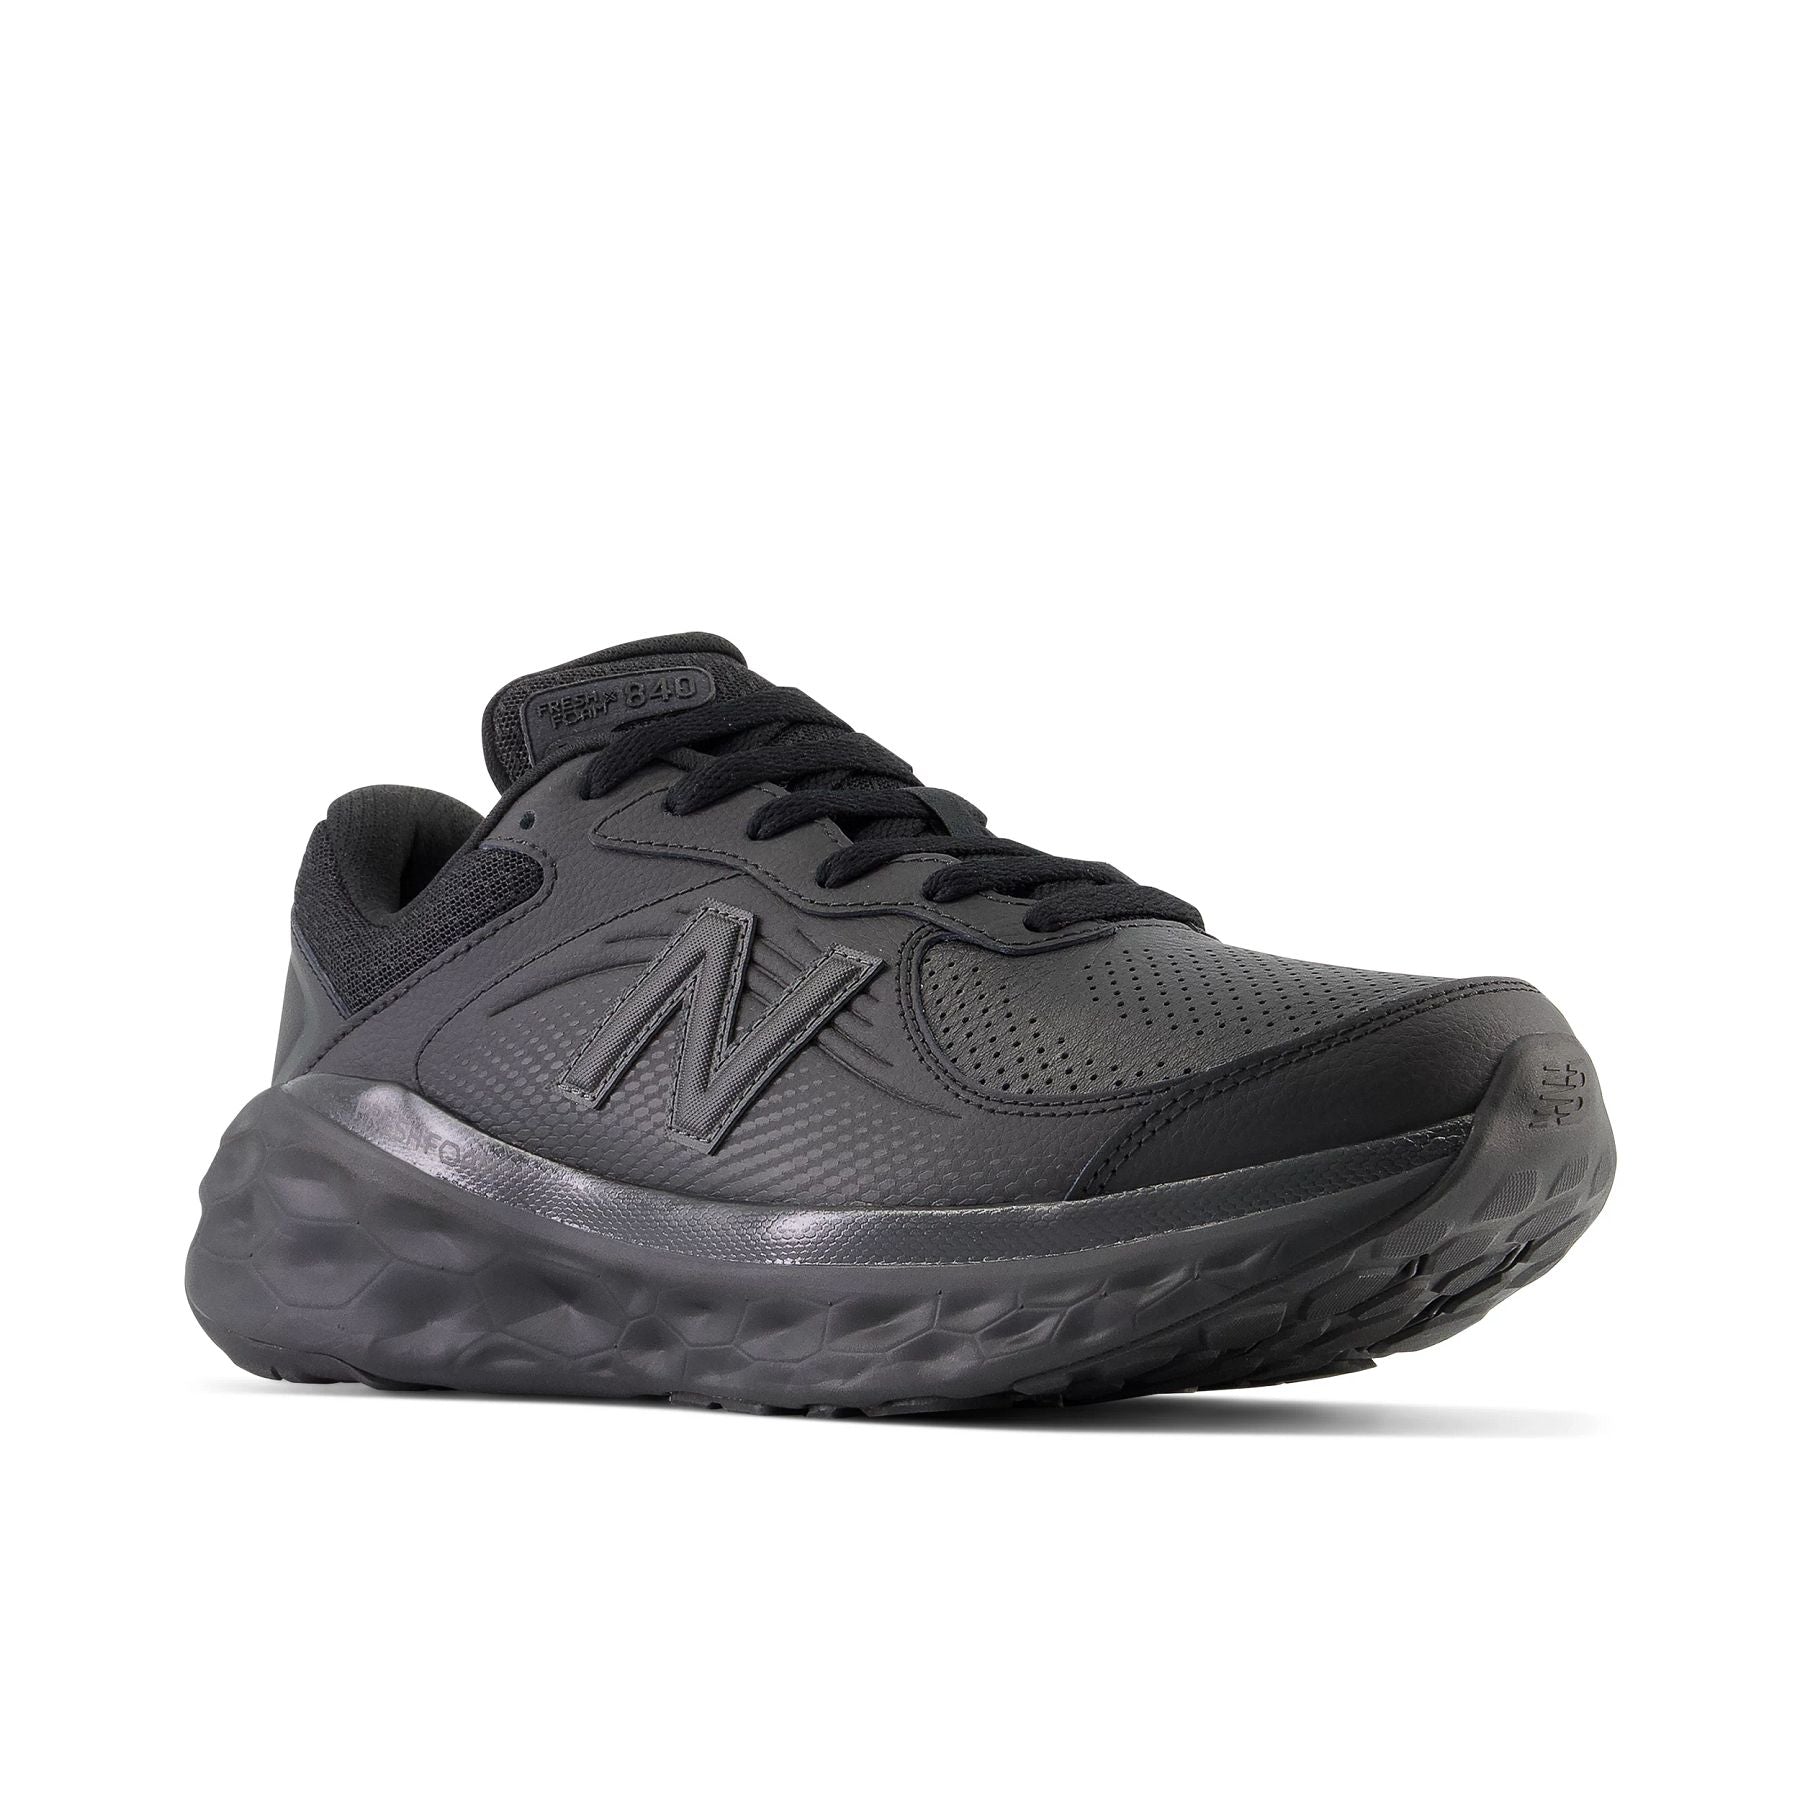 Front angle view of the Women's leather walking shoe WW840 V1 from New Balance in all Black